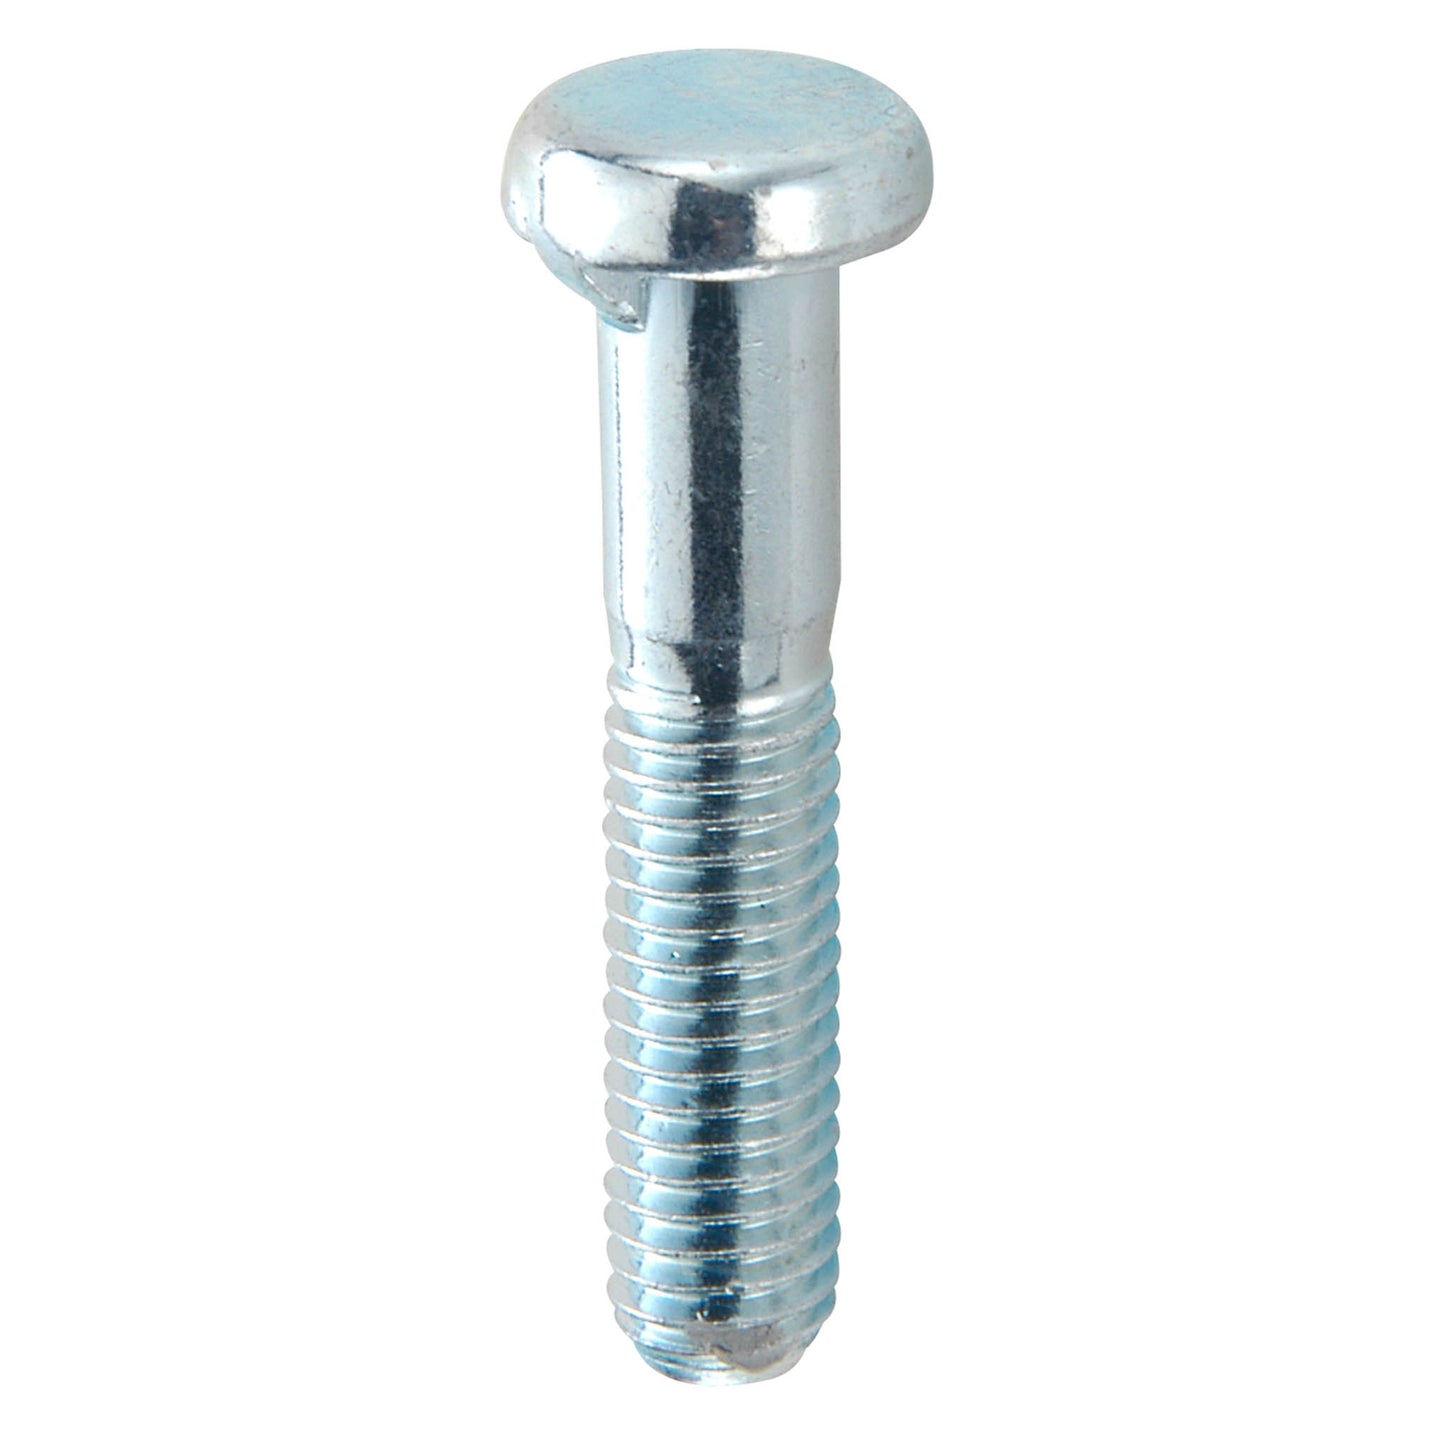 Handlebar and seat post clamping bolt M 8 x 35 galvanized steel